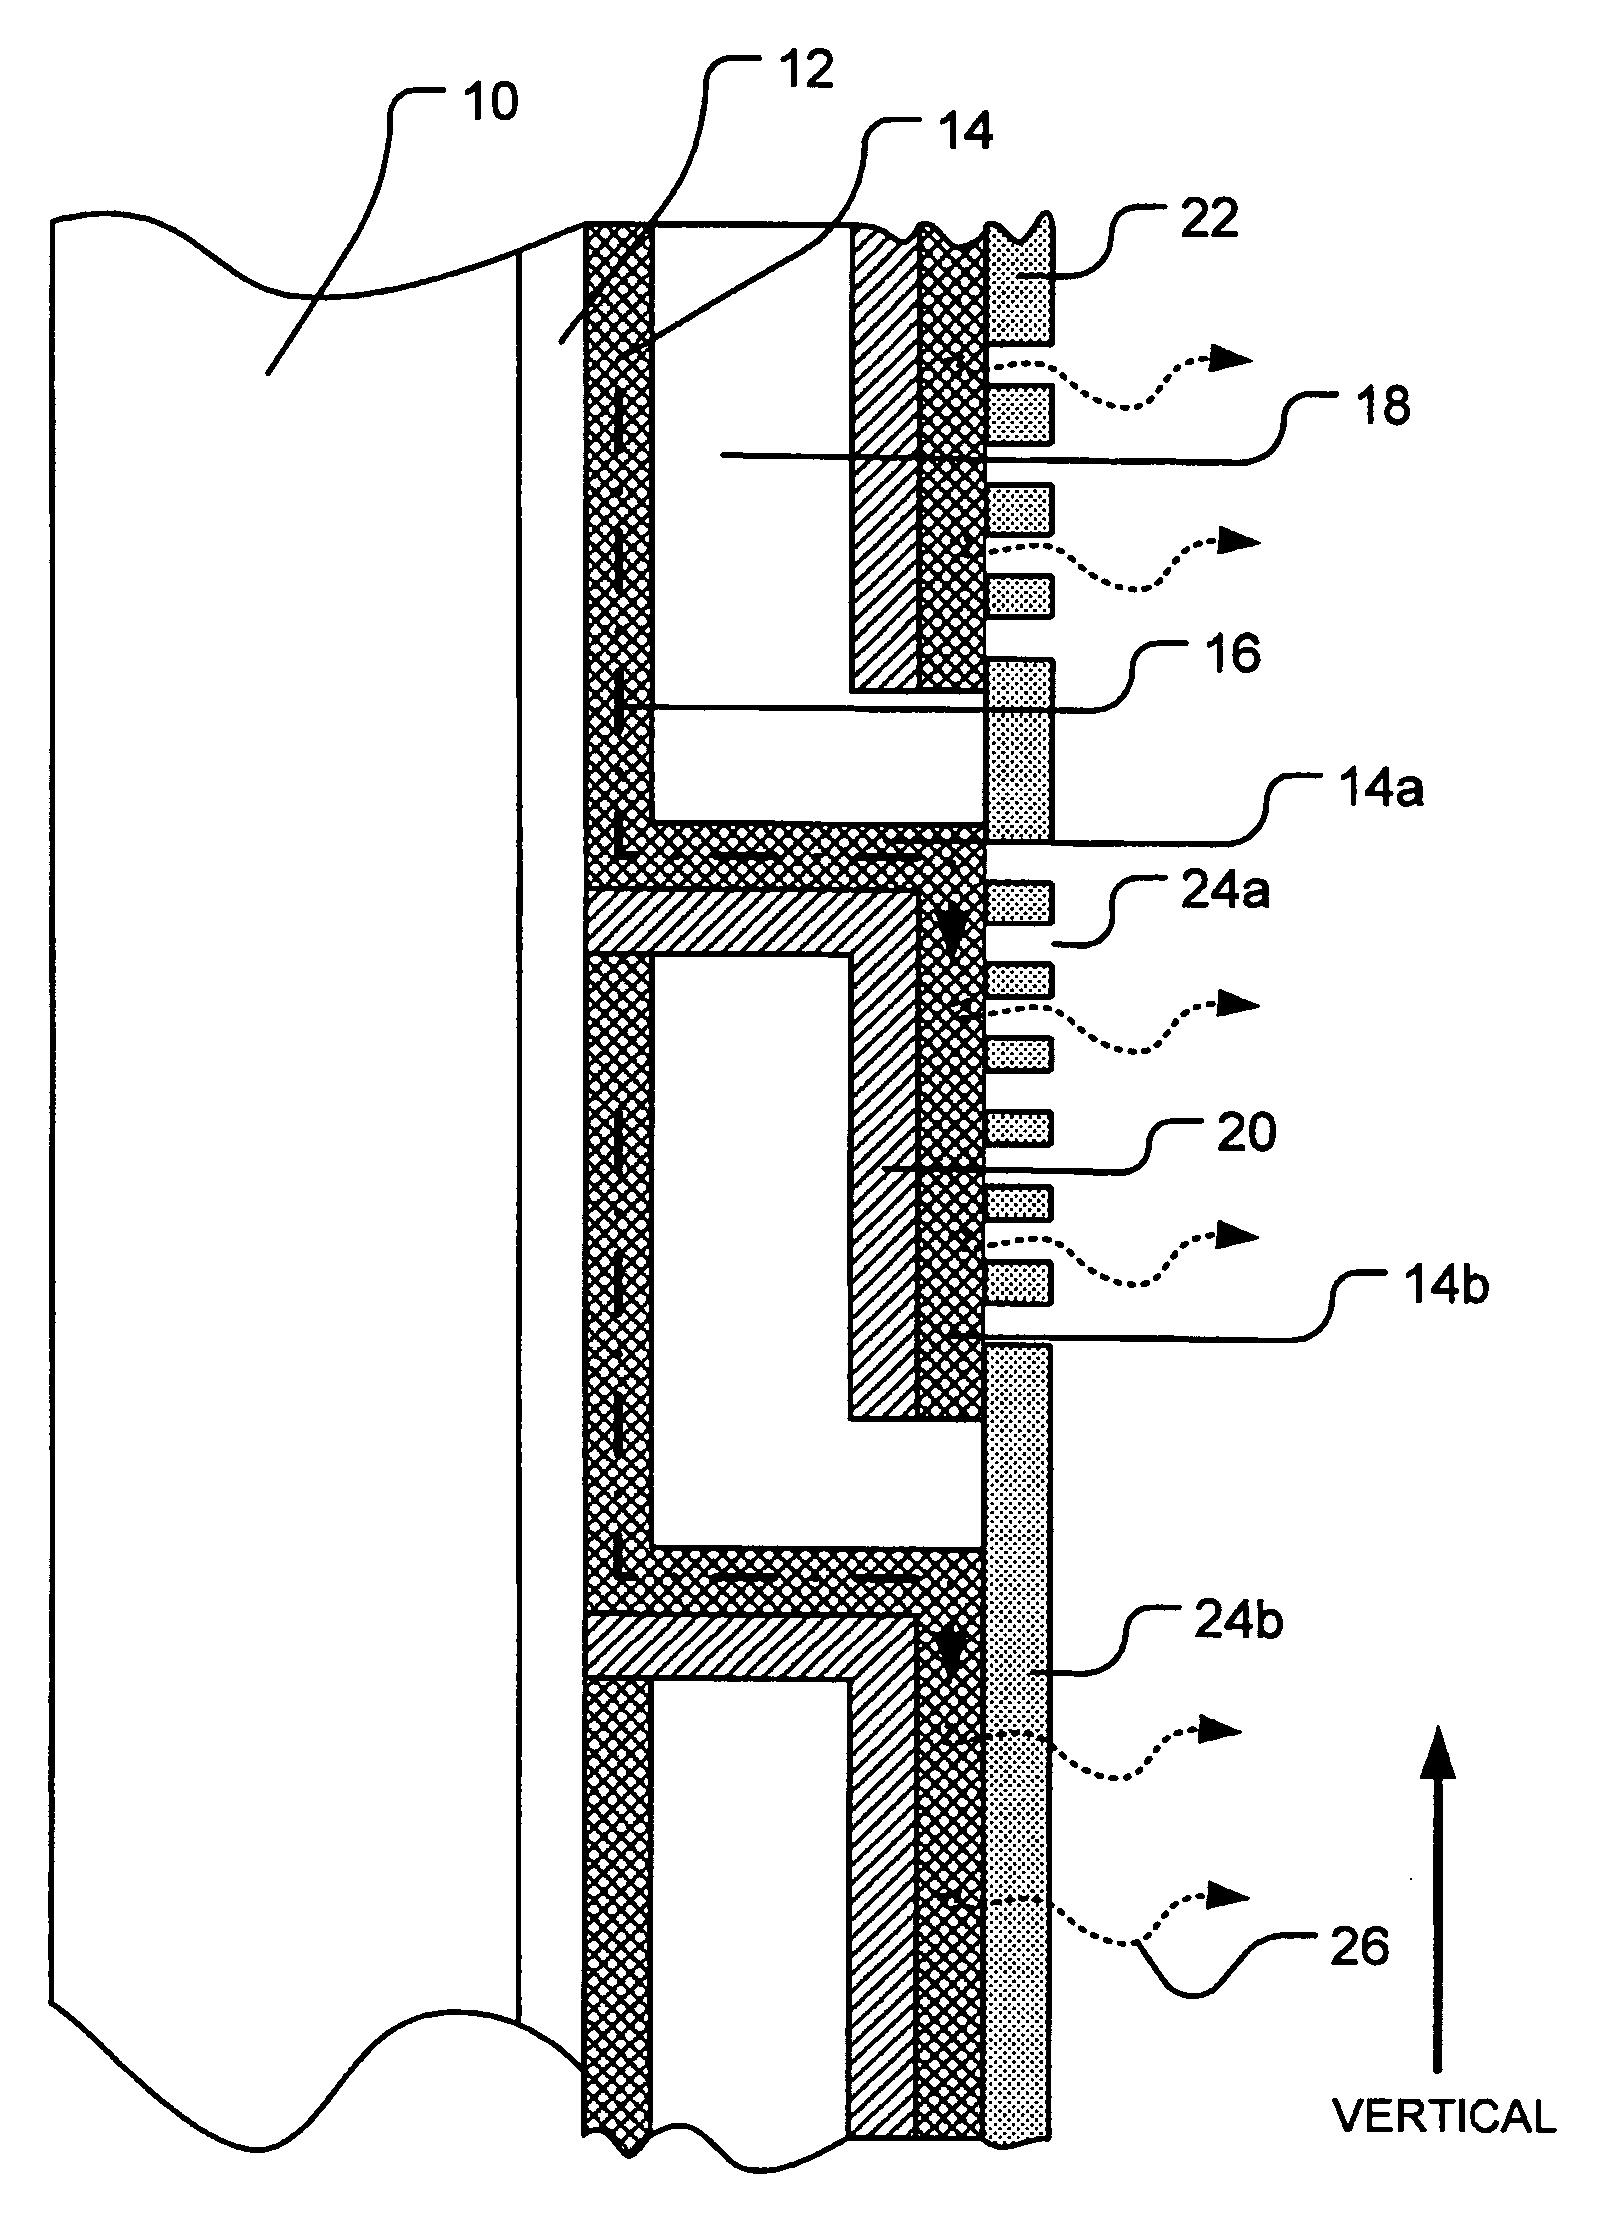 Insulation system with condensate wicking for vertical applications